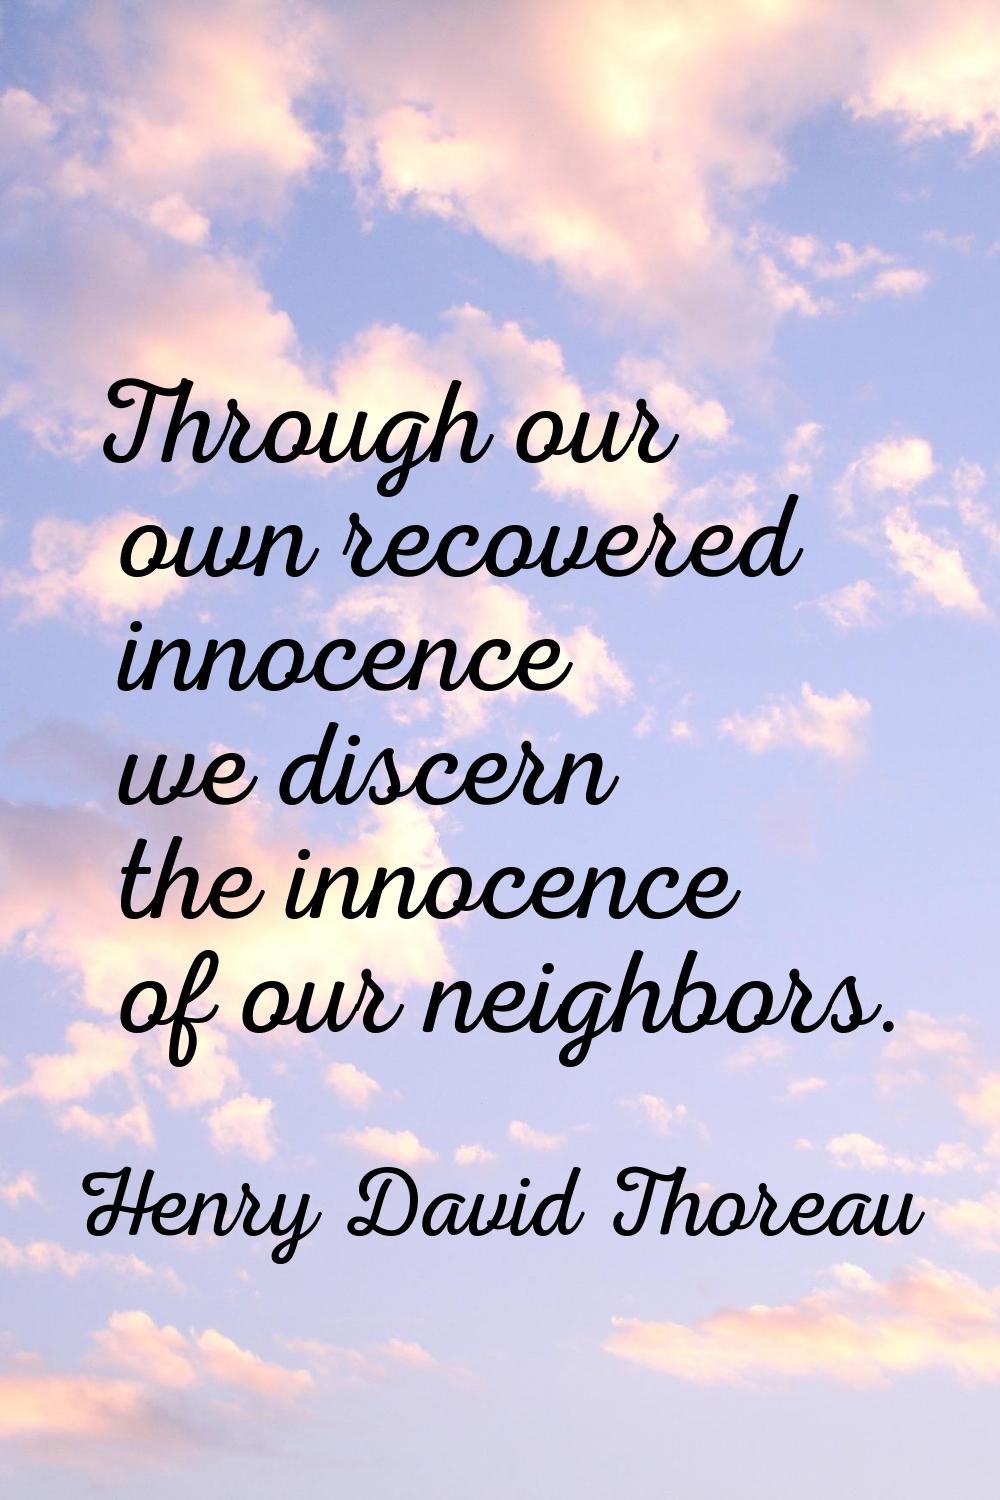 Through our own recovered innocence we discern the innocence of our neighbors.